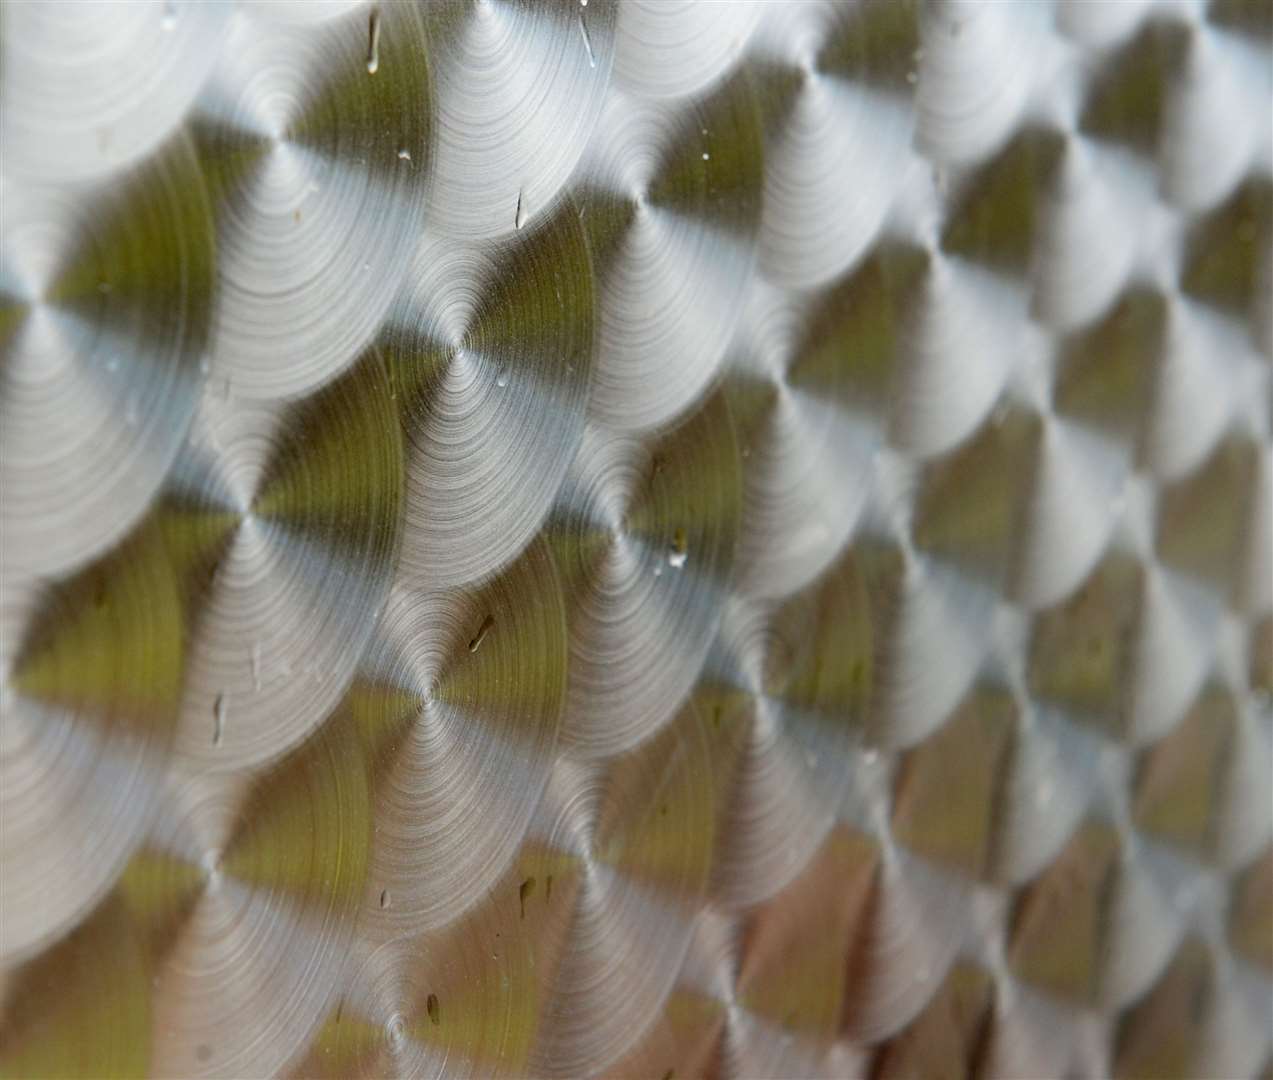 The surface designed to resemble salmon scales.